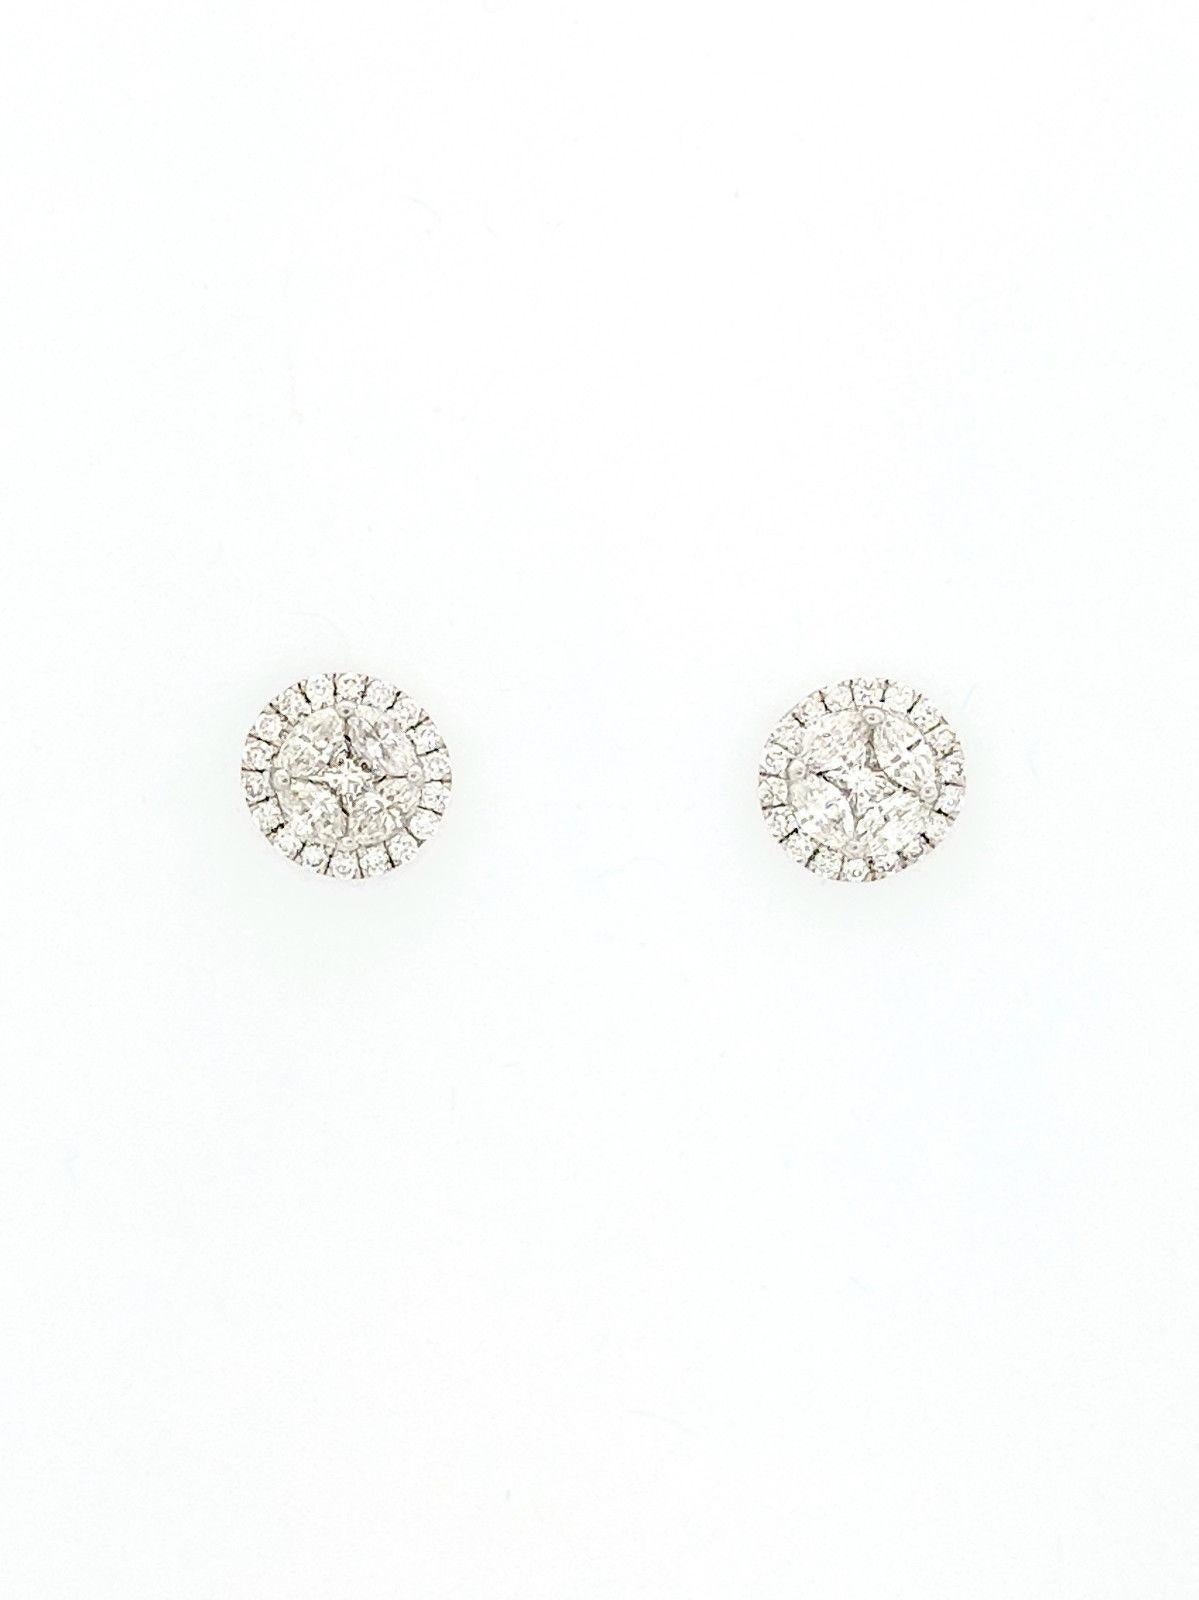 You are viewing a beautiful pair of illusion set diamond halo stud earrings. These earrings are crafted from 18k white gold and weighs .9 grams. They feature (1) .10ct natural princess cut diamond in the center of (4) .03ct natural marquise